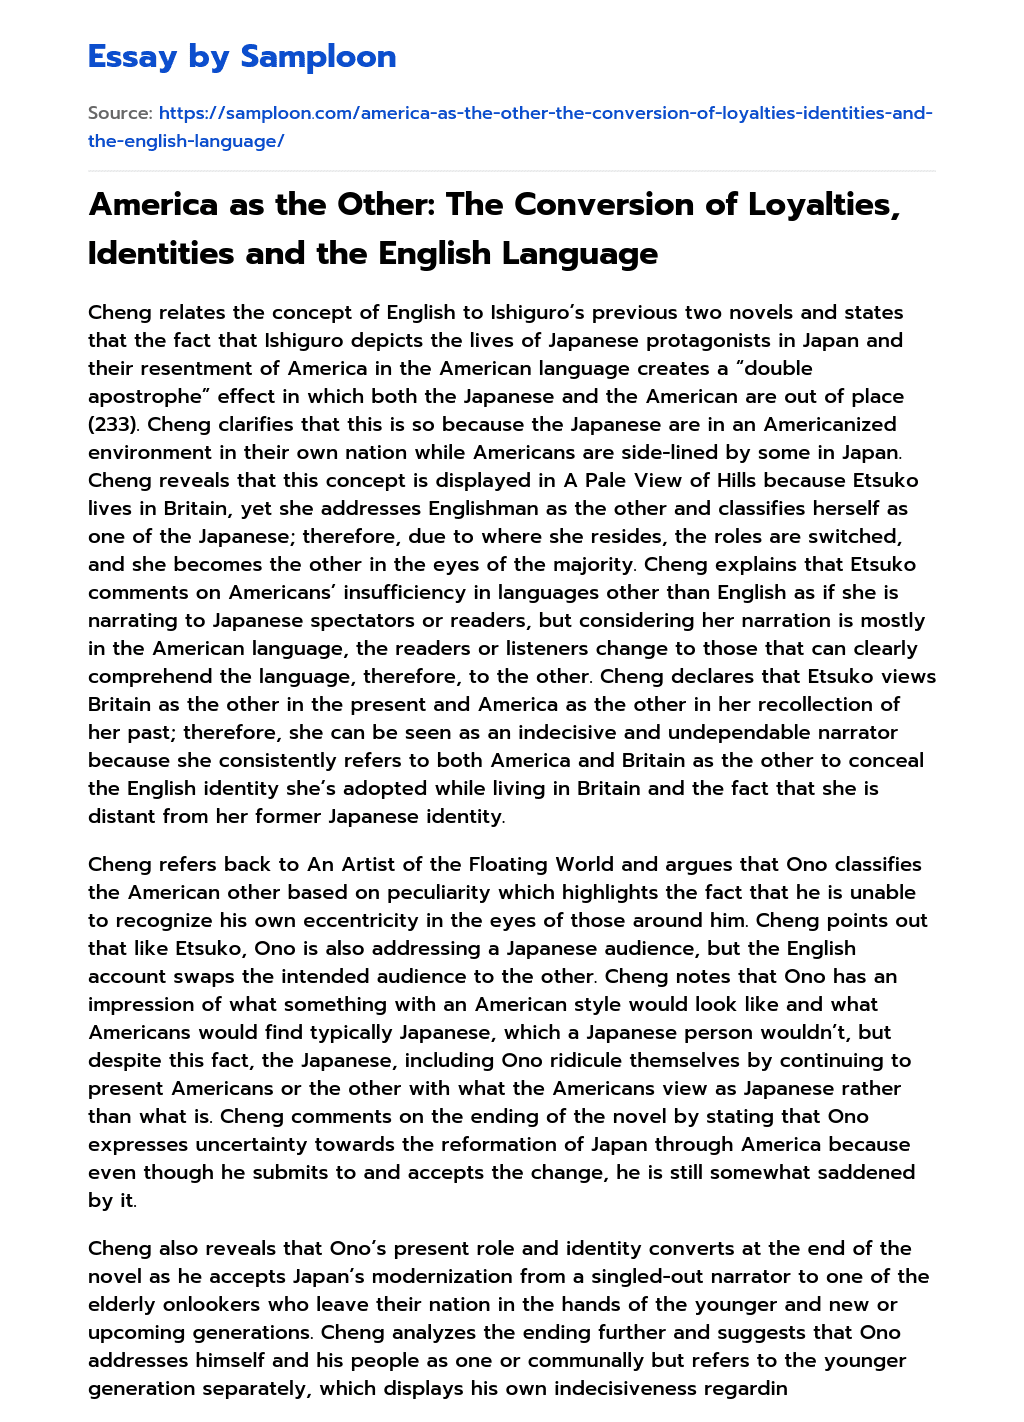 America as the Other: The Conversion of Loyalties, Identities and the English Language essay